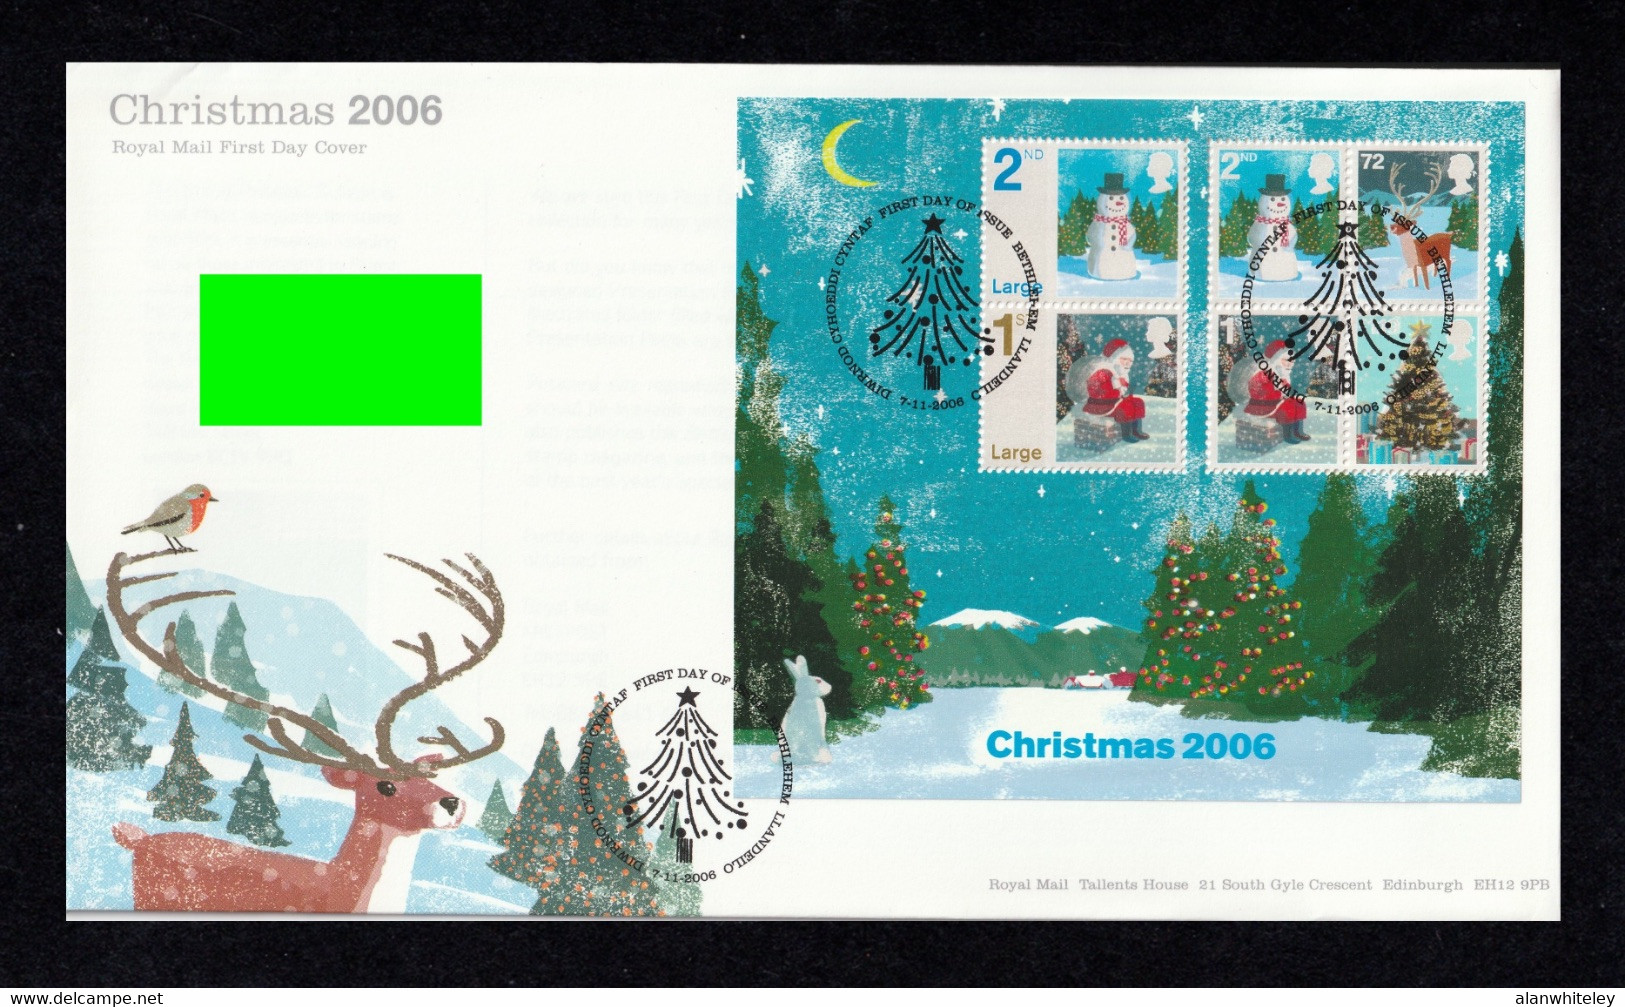 GREAT BRITAIN 2006 Christmas: Miniature Sheet First Day Cover CANCELLED - 2001-2010 Decimal Issues